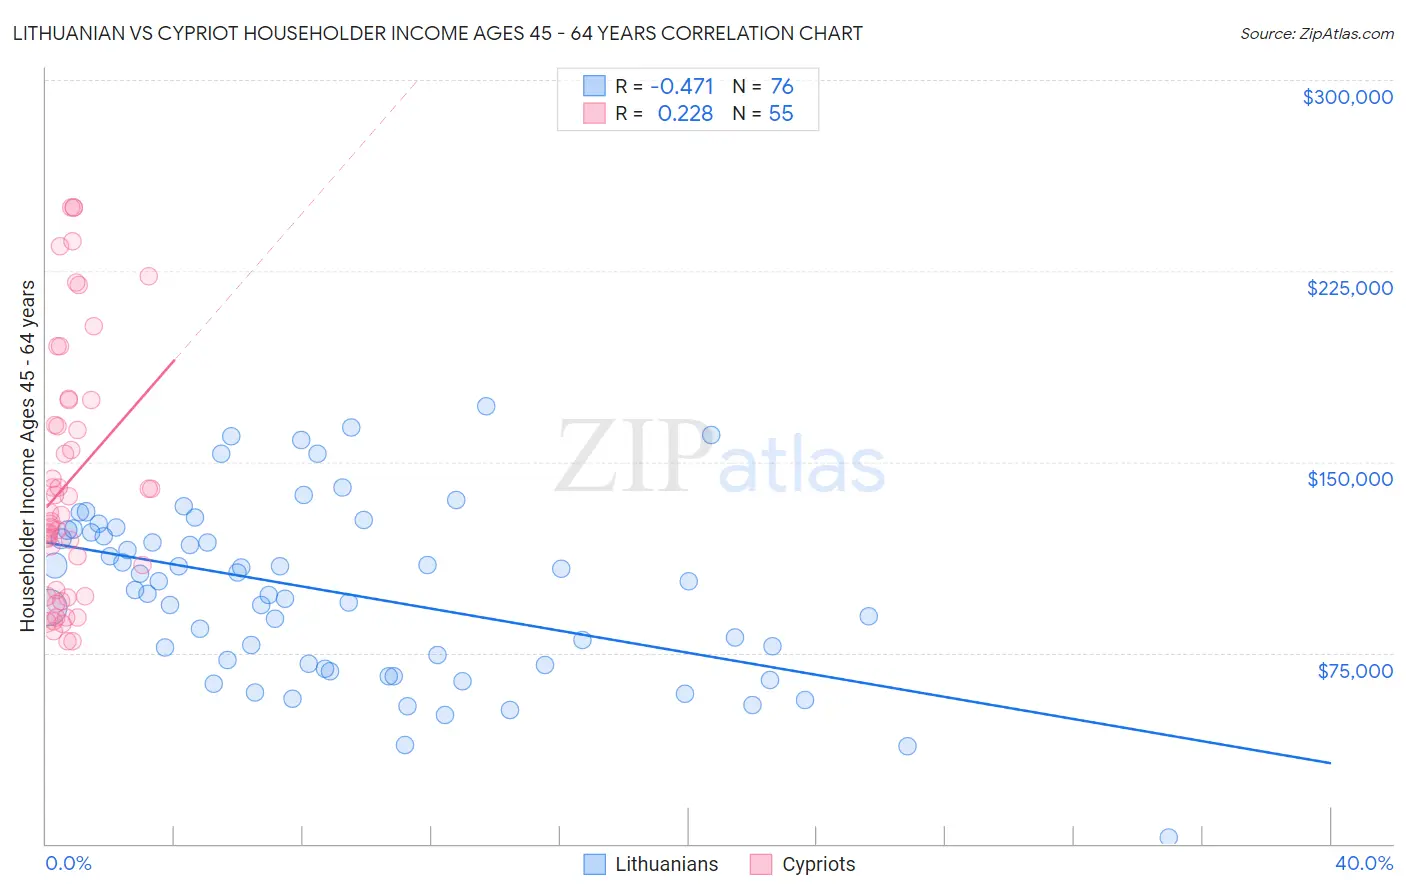 Lithuanian vs Cypriot Householder Income Ages 45 - 64 years